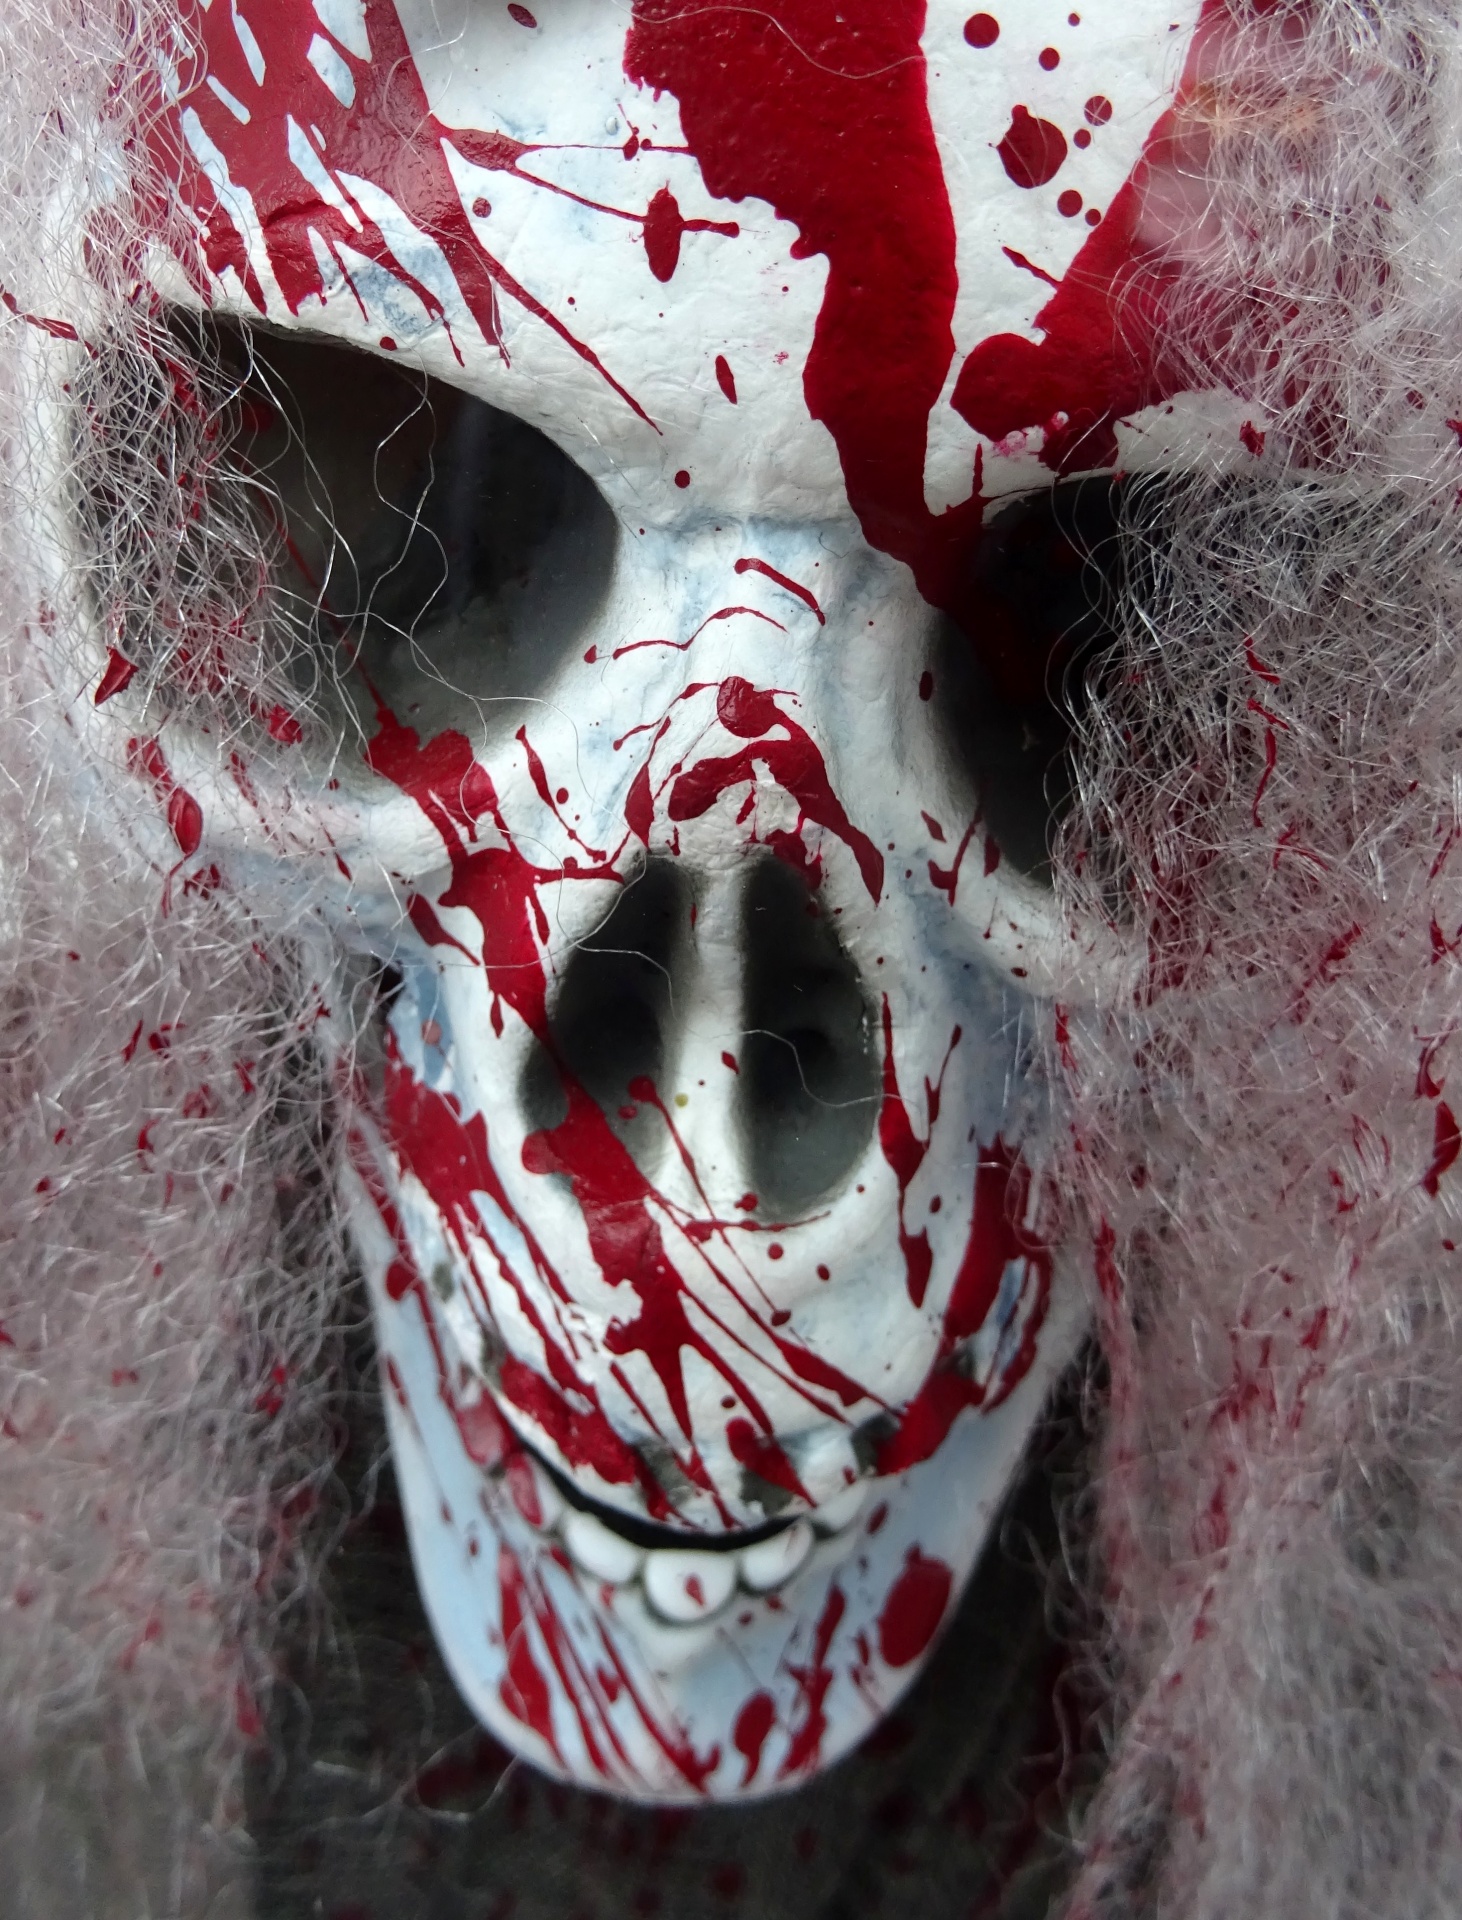 Scary Blood Spattered Halloween Mask